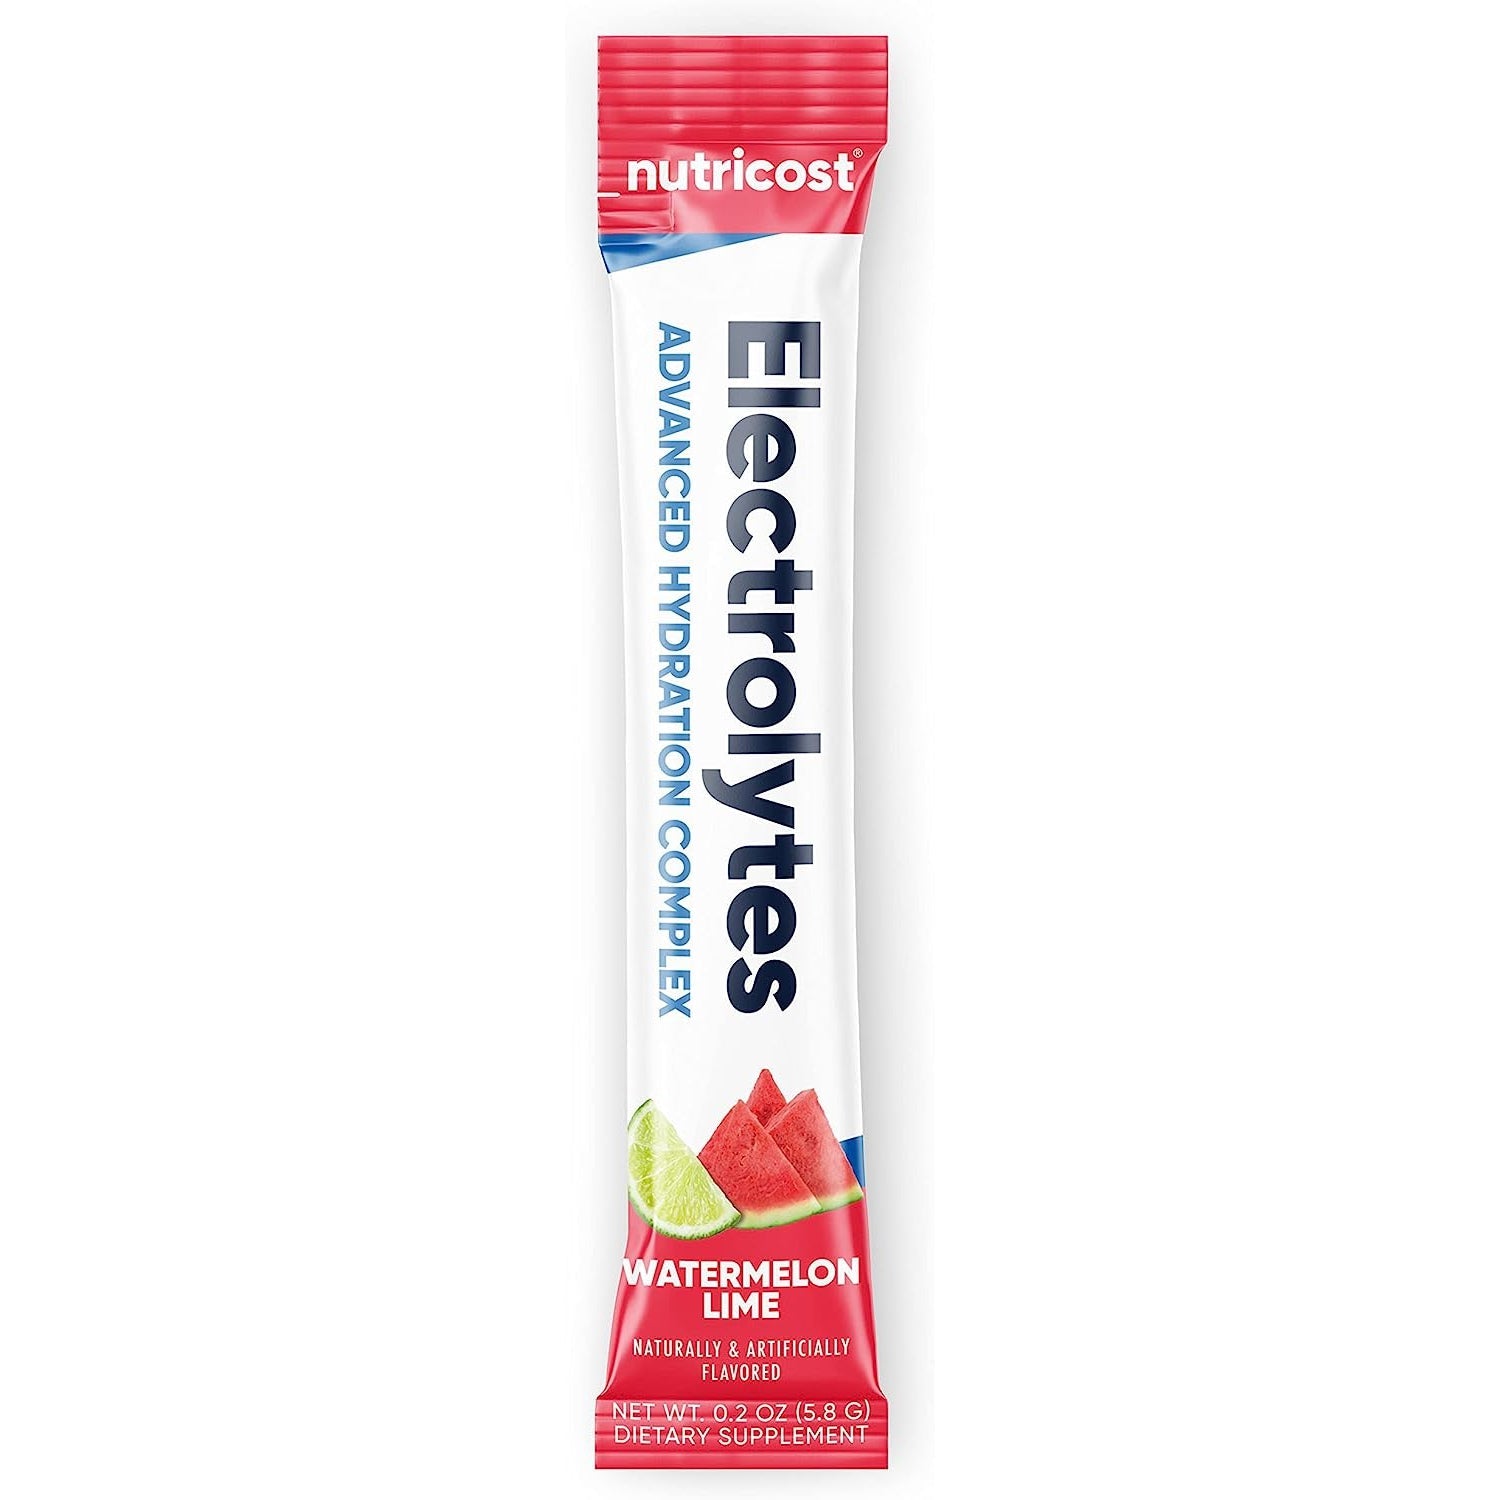 Nutricost Electrolytes Powder Hydration Packets Zero Sugar Low Calorie Keto Gluten Free 20 Packets - Watermelon Lime